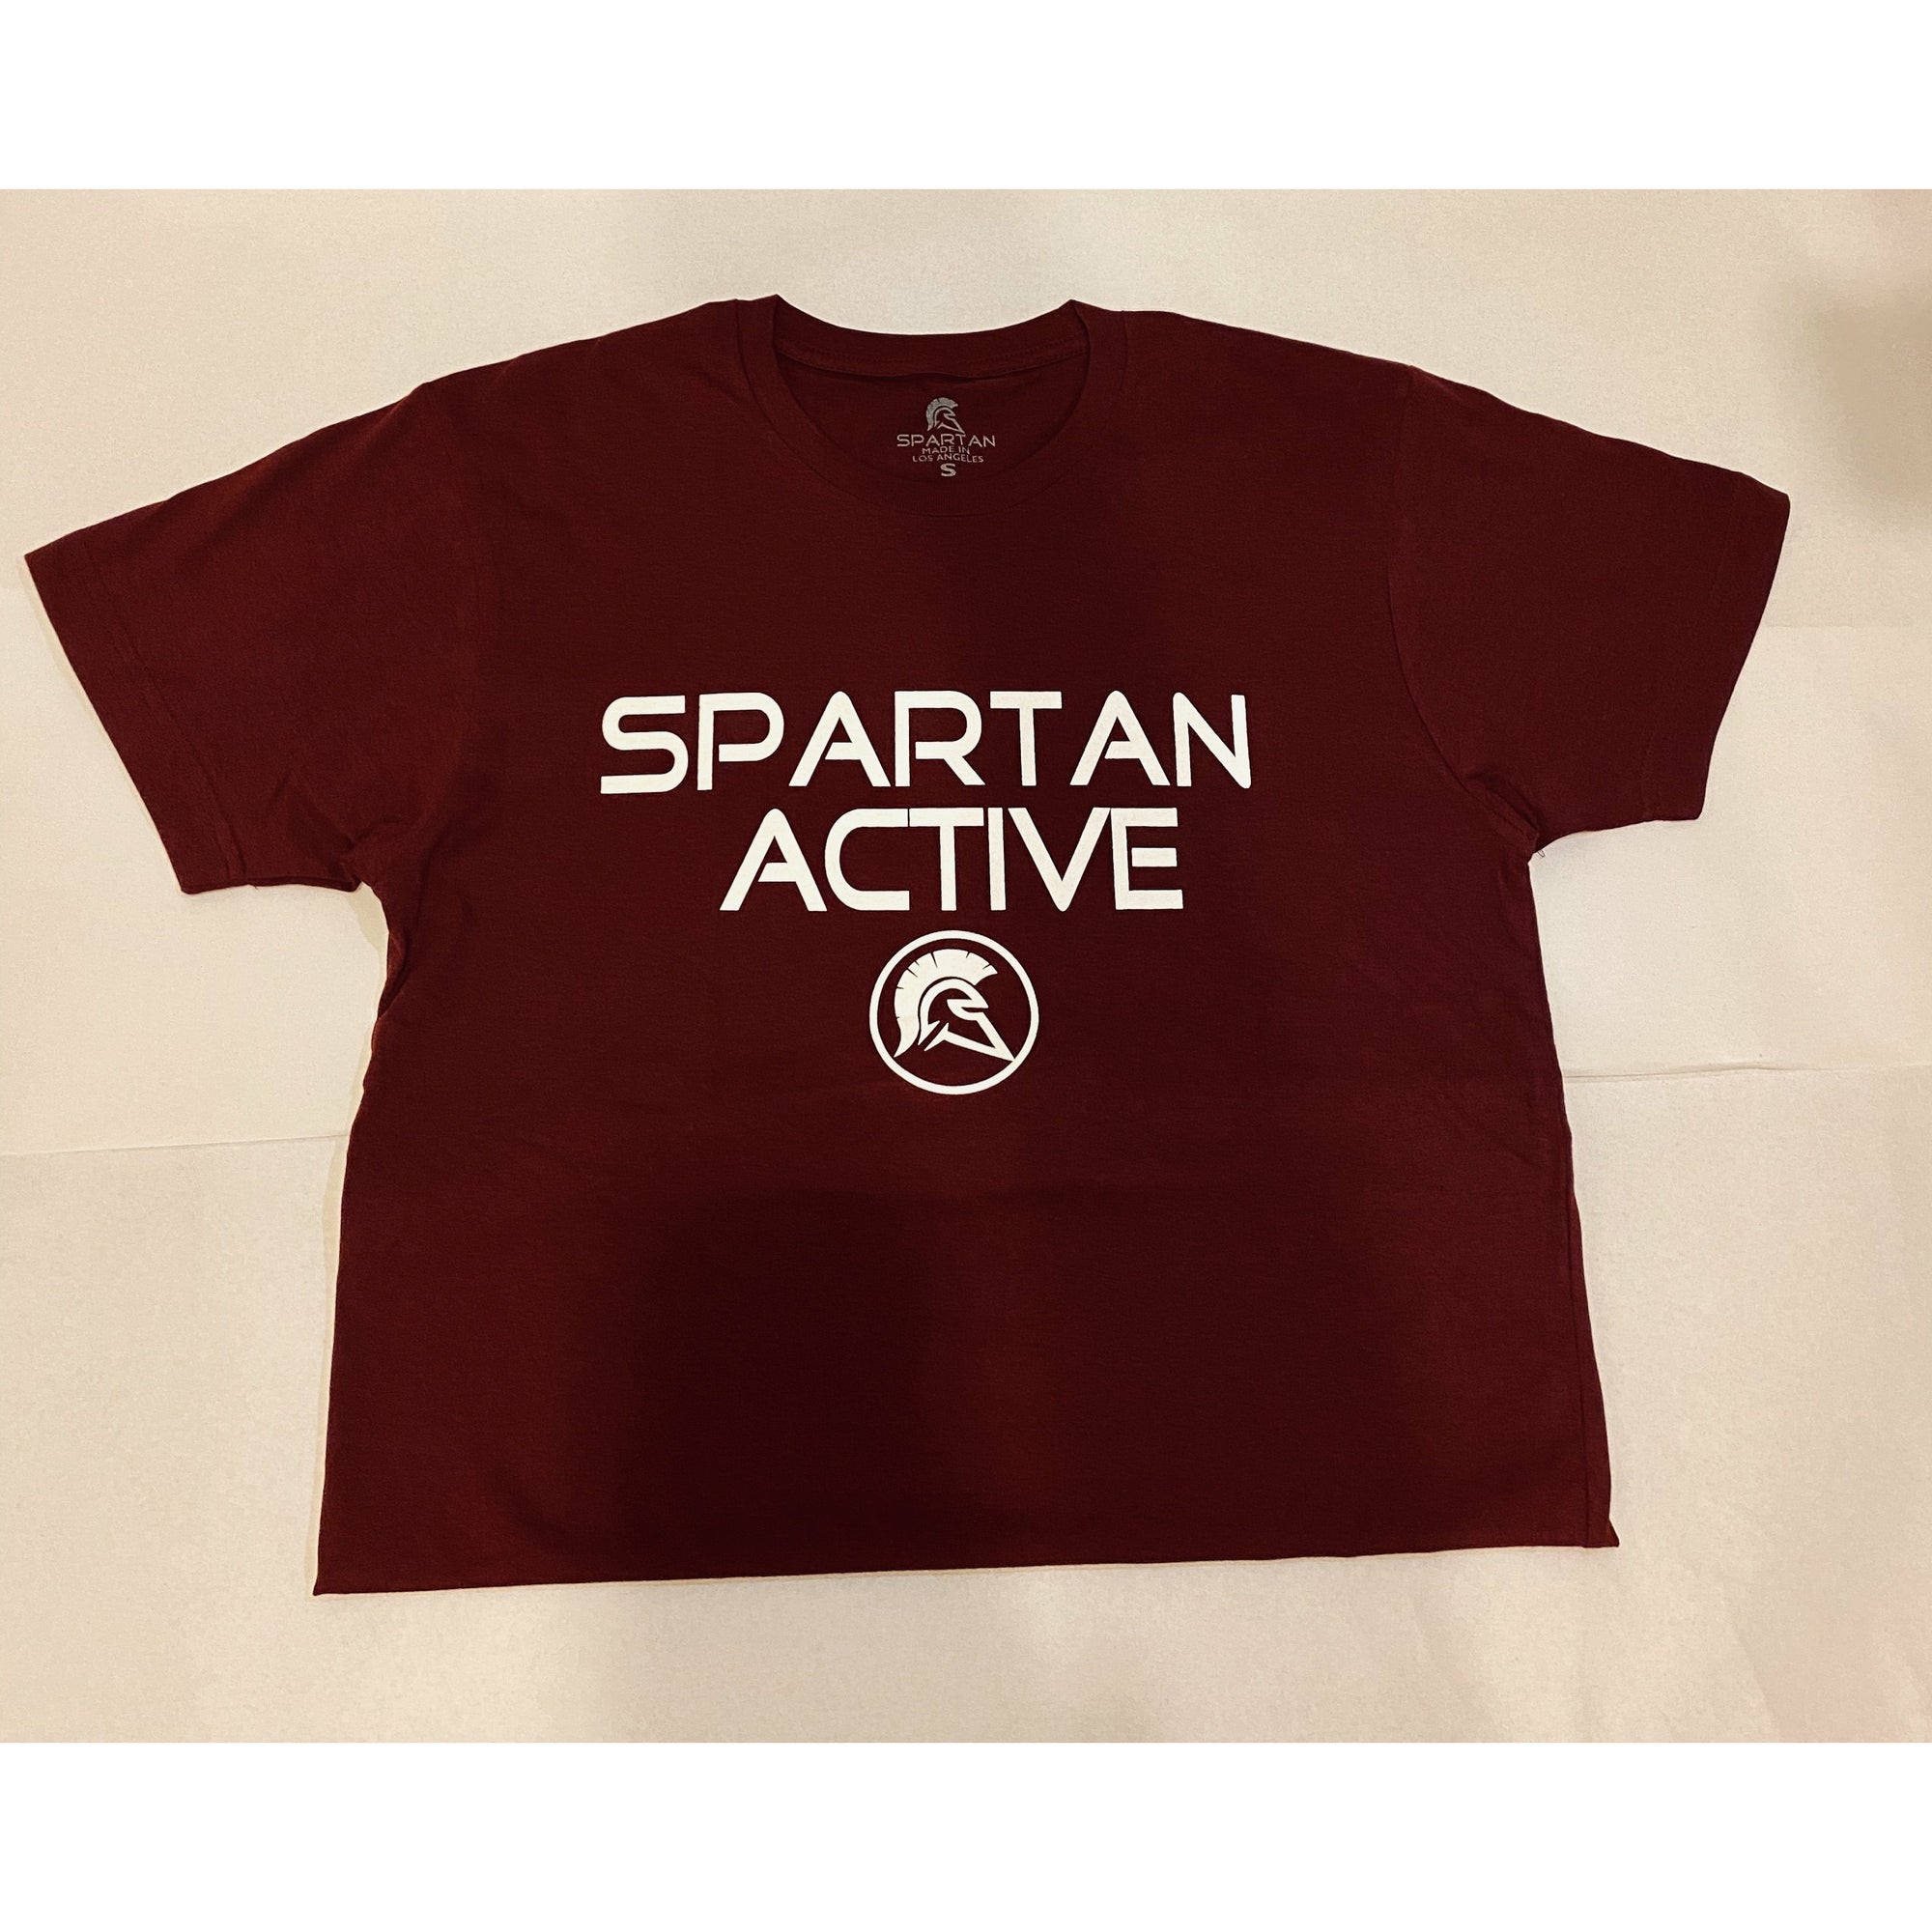 WARRIORS NOT QUITTERS⚔️🔥💪 #spartanwearactive #spartan #fitness